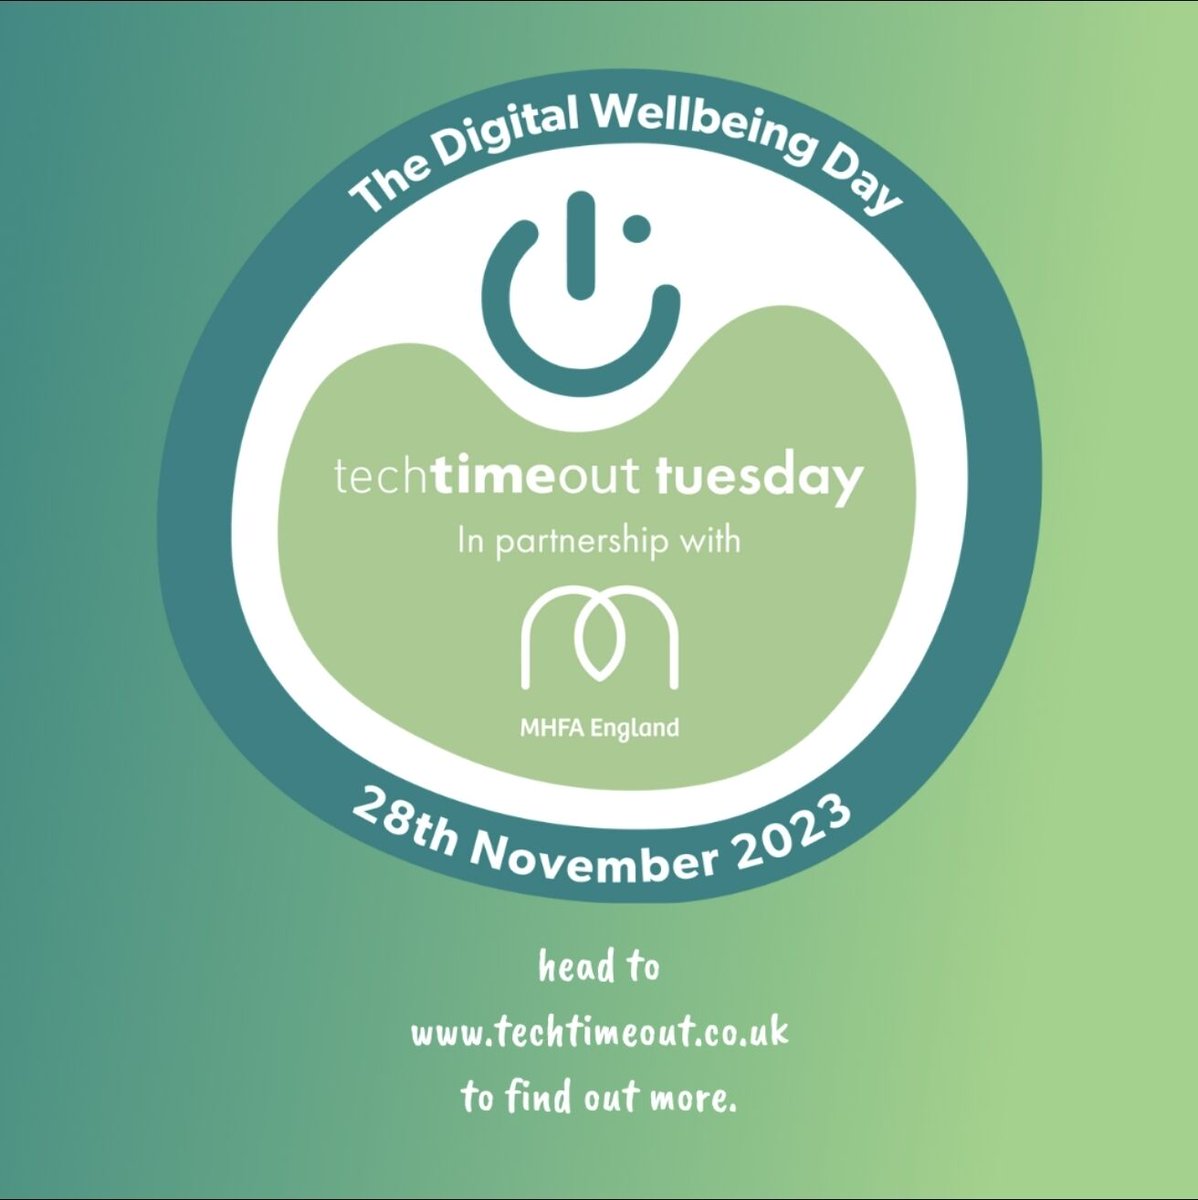 On 28th November, @RecoveryDevon evon is delighted to partner with @MHFAEngland and @techtimeout, a digital wellbeing company, to observe #TechTimeOutTuesday. Take your pledge and get involved: techtimeout.co.uk/techtimeout-tu…